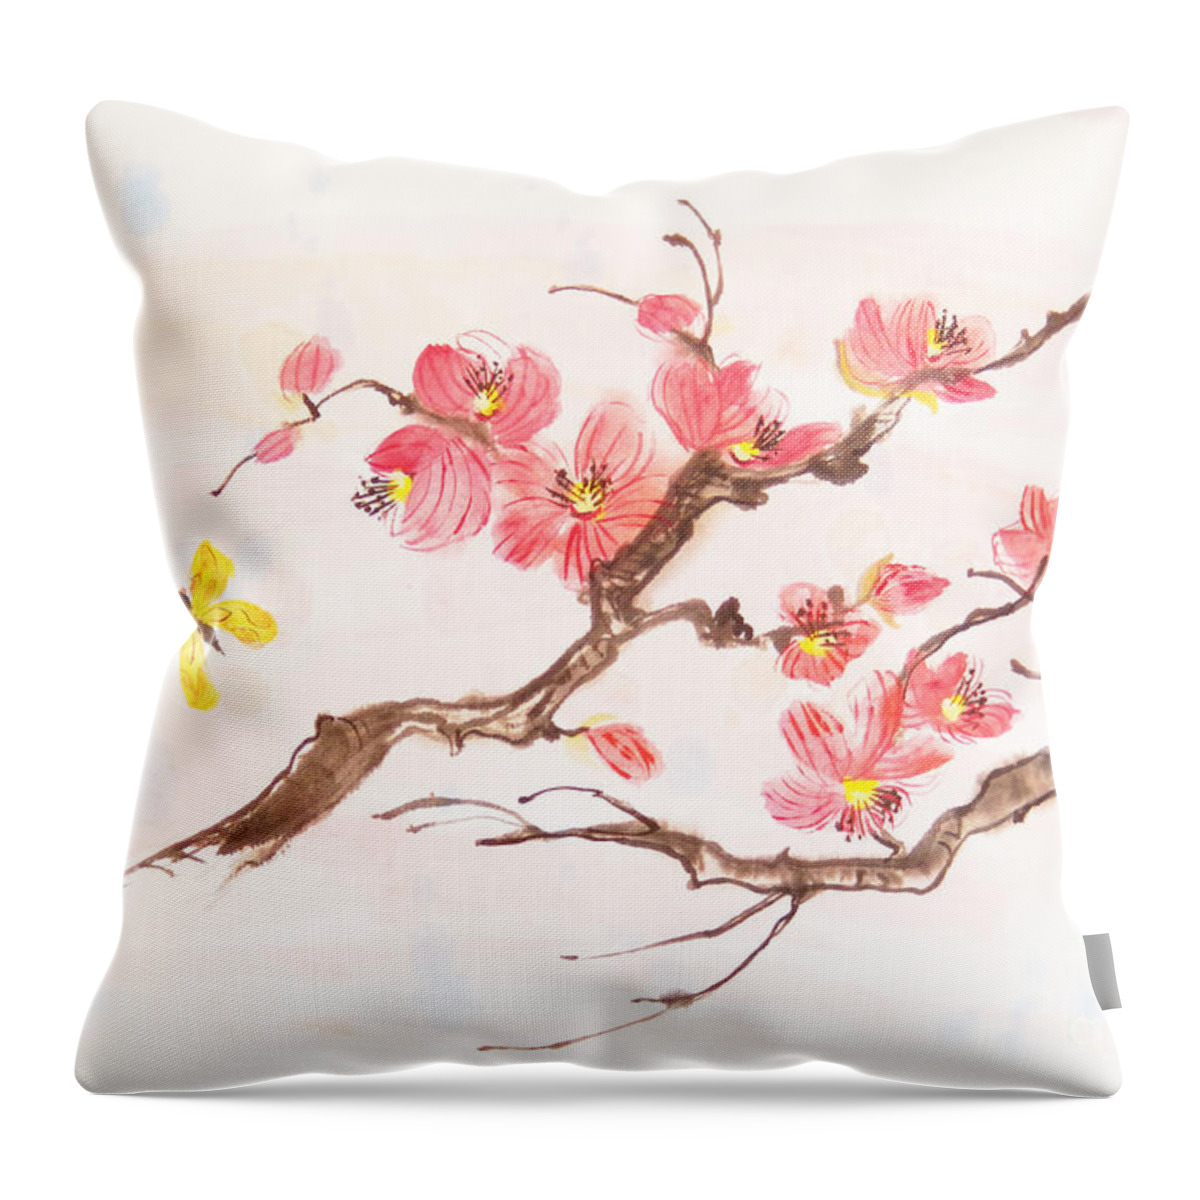 Top Artist Throw Pillow featuring the painting Spring Glory by Sharon Nelson-Bianco